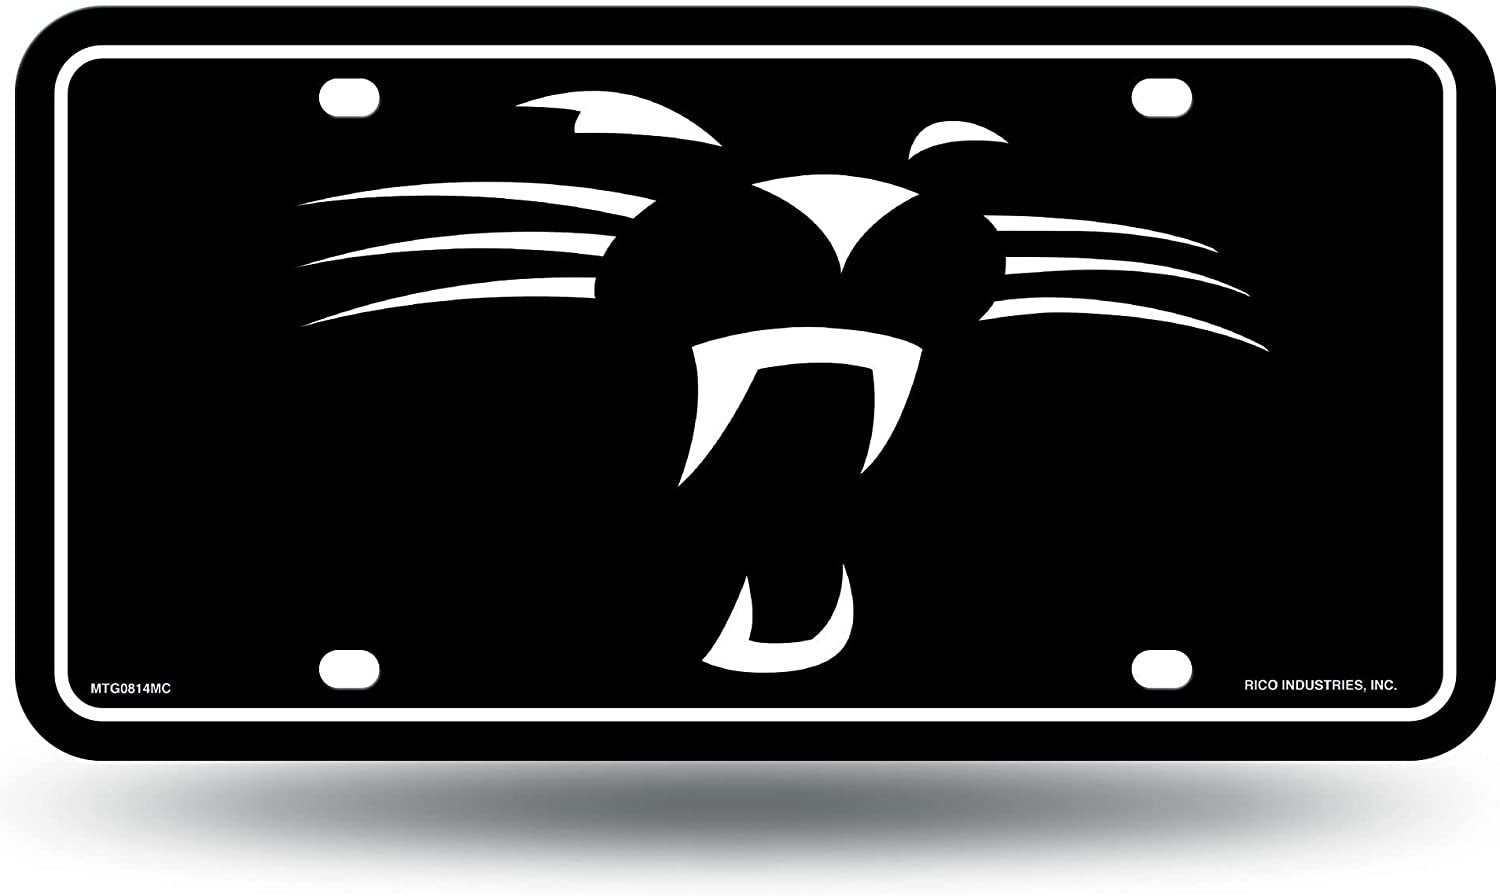 Carolina Panthers Metal Auto Tag License Plate, Whiskers Design, 6x12 Inch